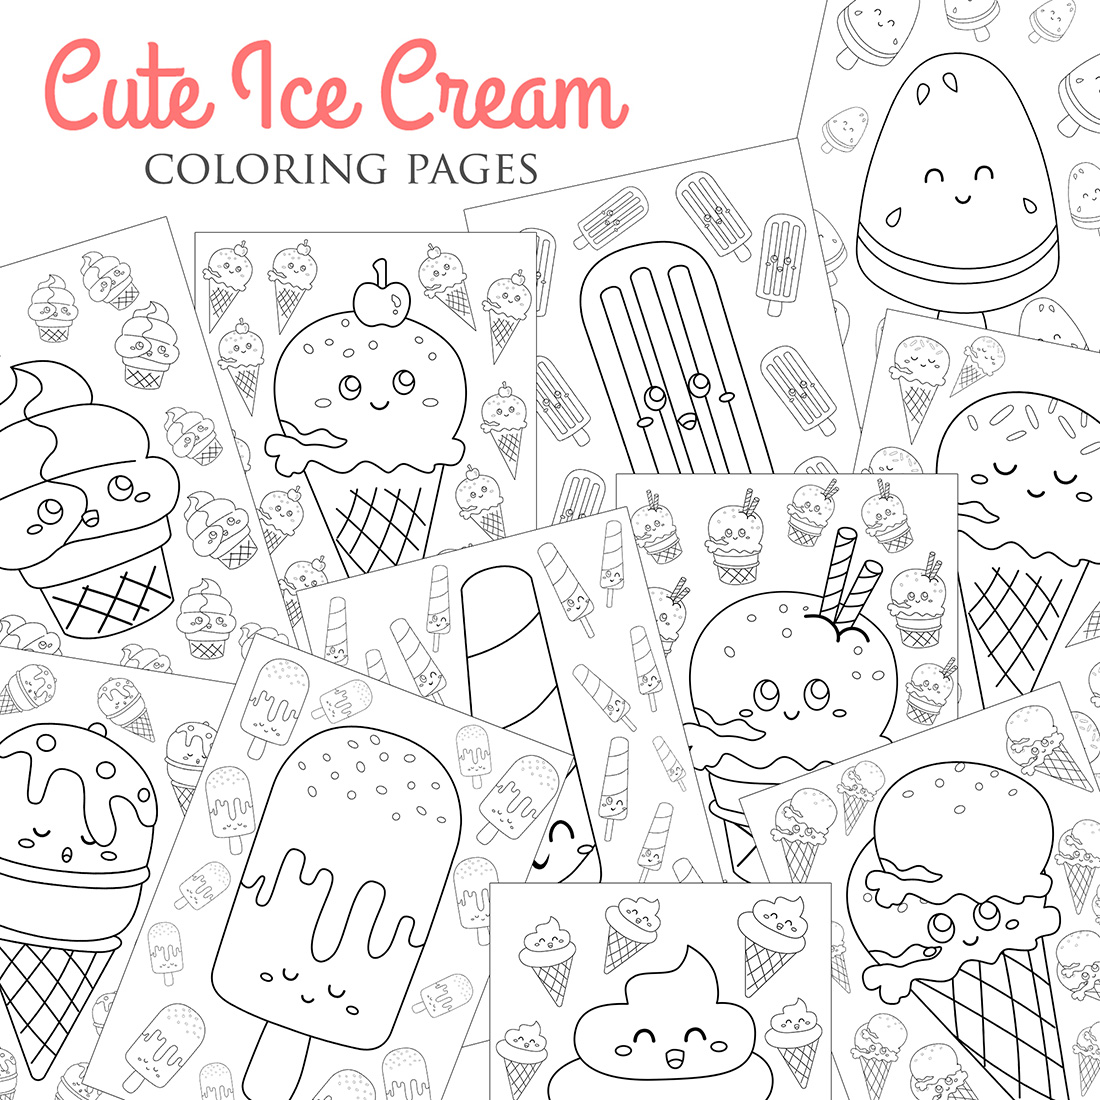 Cute Ice Cream Dessert Flavor Snack Cone Scoop Fruit Chocolate Strawberry Cup Sprinkle Doodle Funny Coloring for Kids and Adult Cartoon cover image.